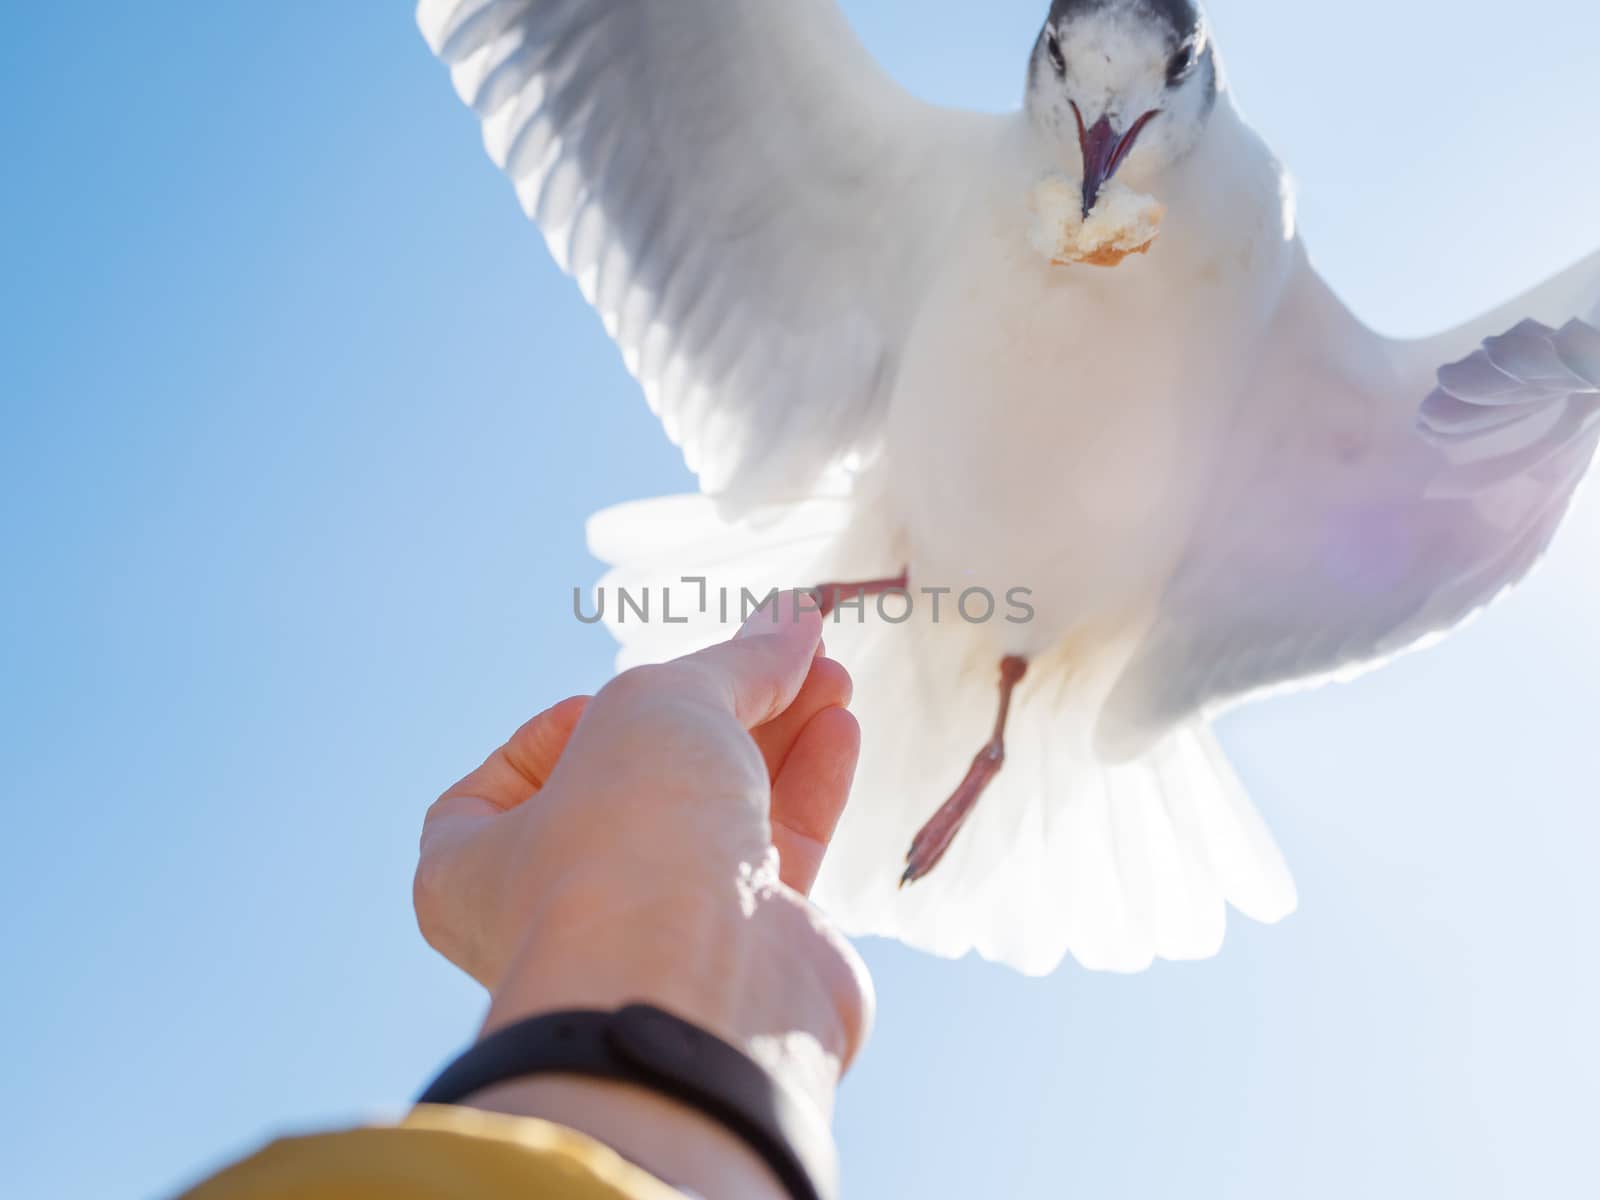 Seagull snatched a piece of bread from the woman's hand. Feeding birds. Bright blue sky on background.